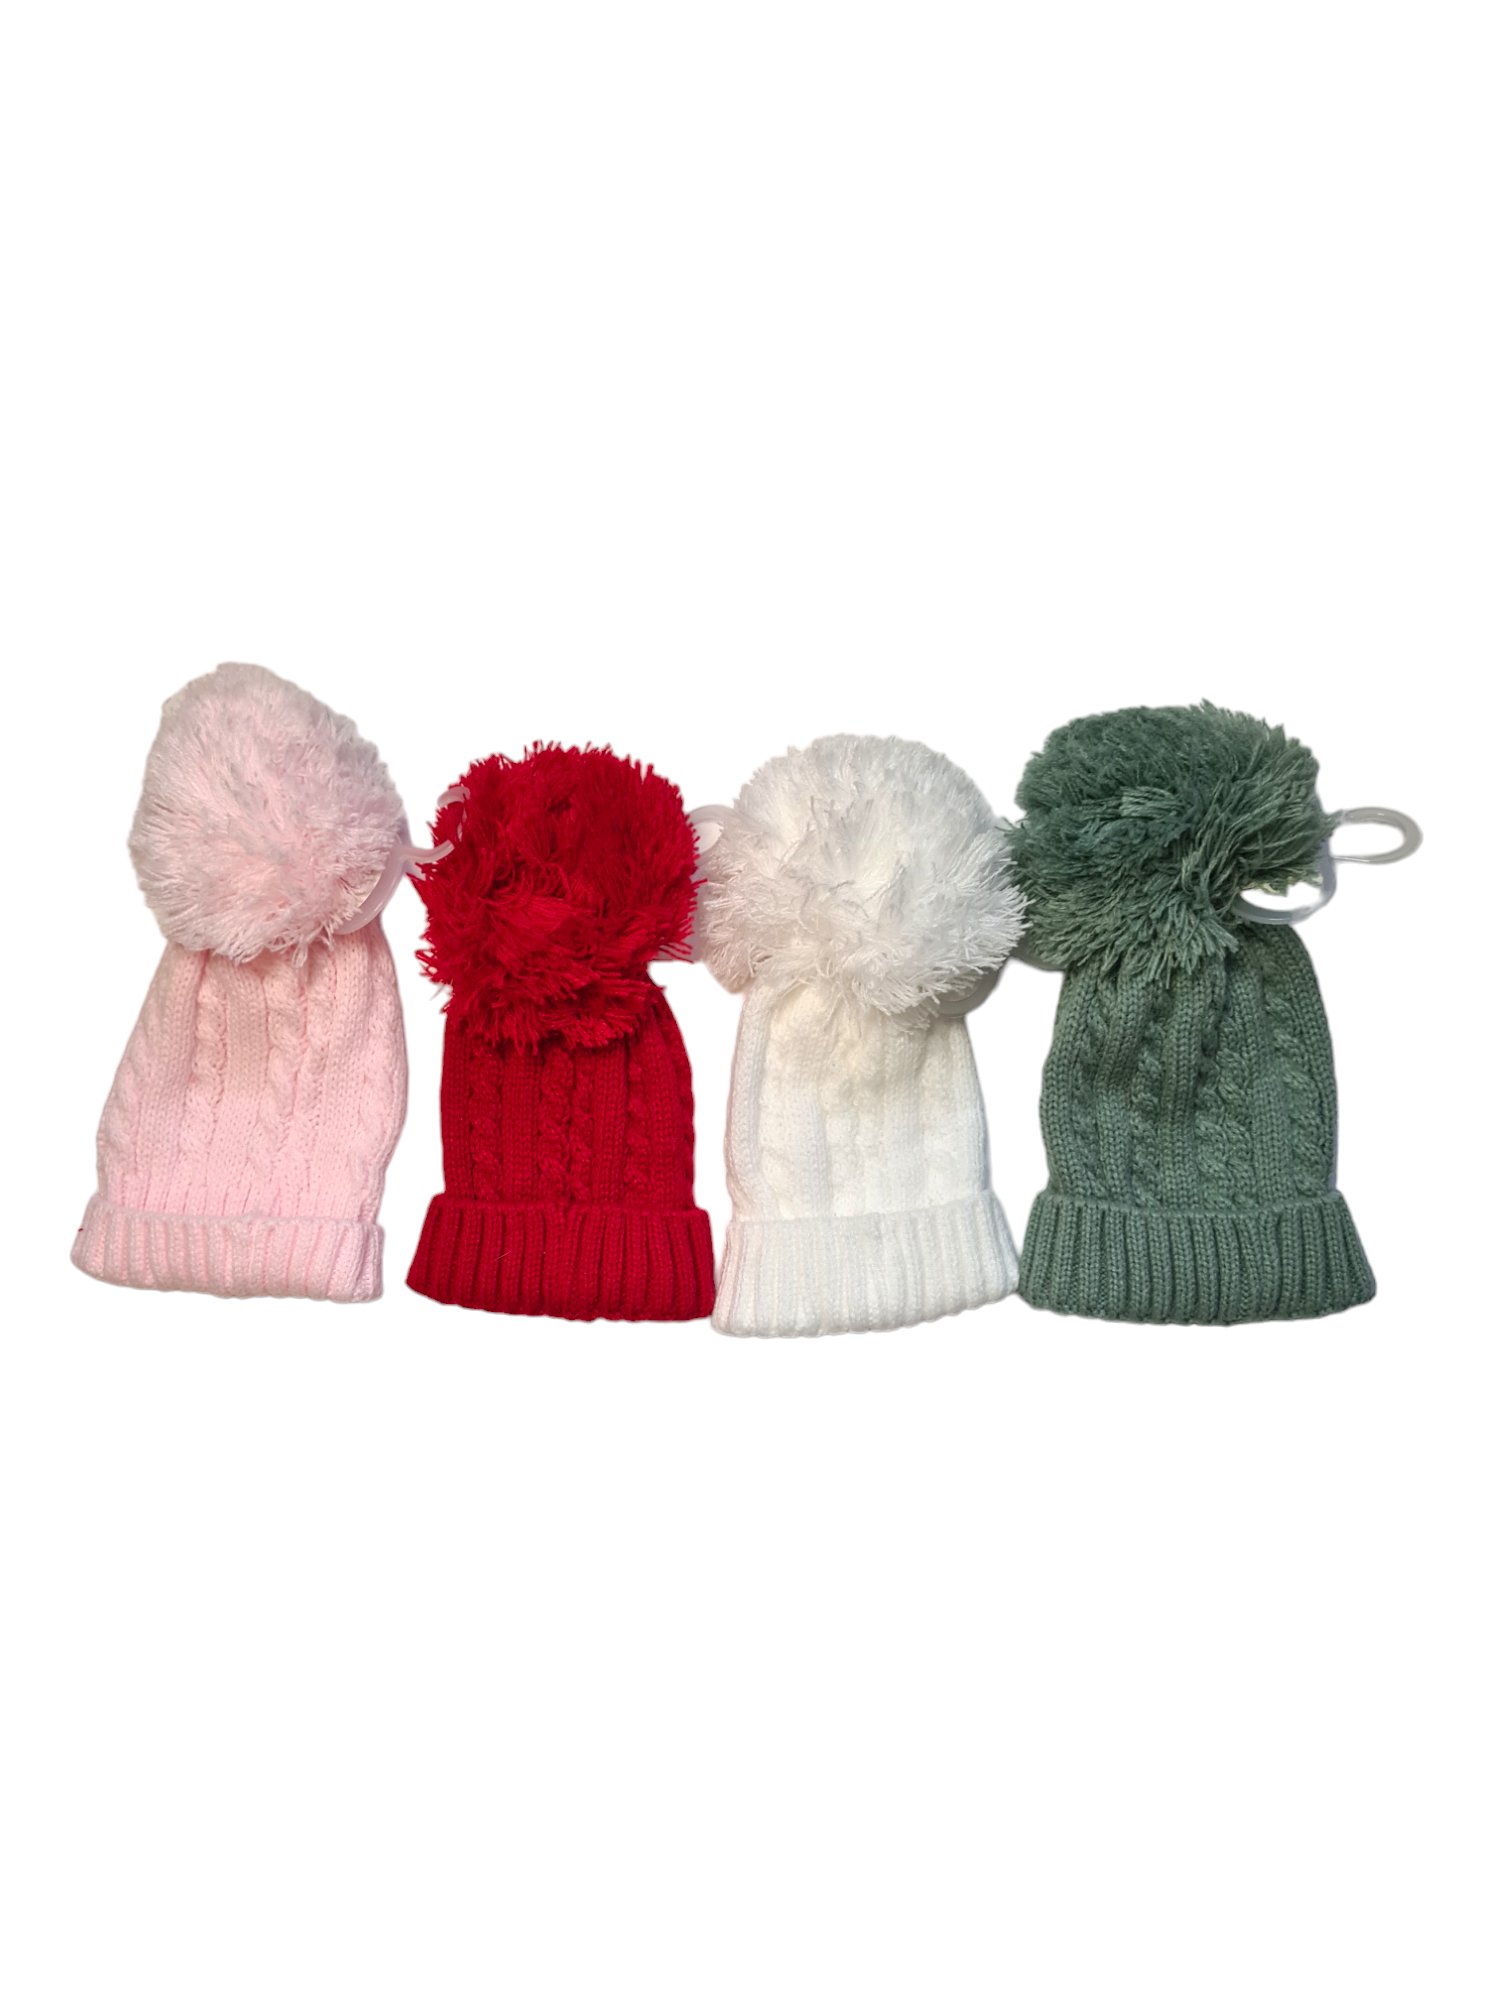 Kids Knitted Hats - Mylookmyway